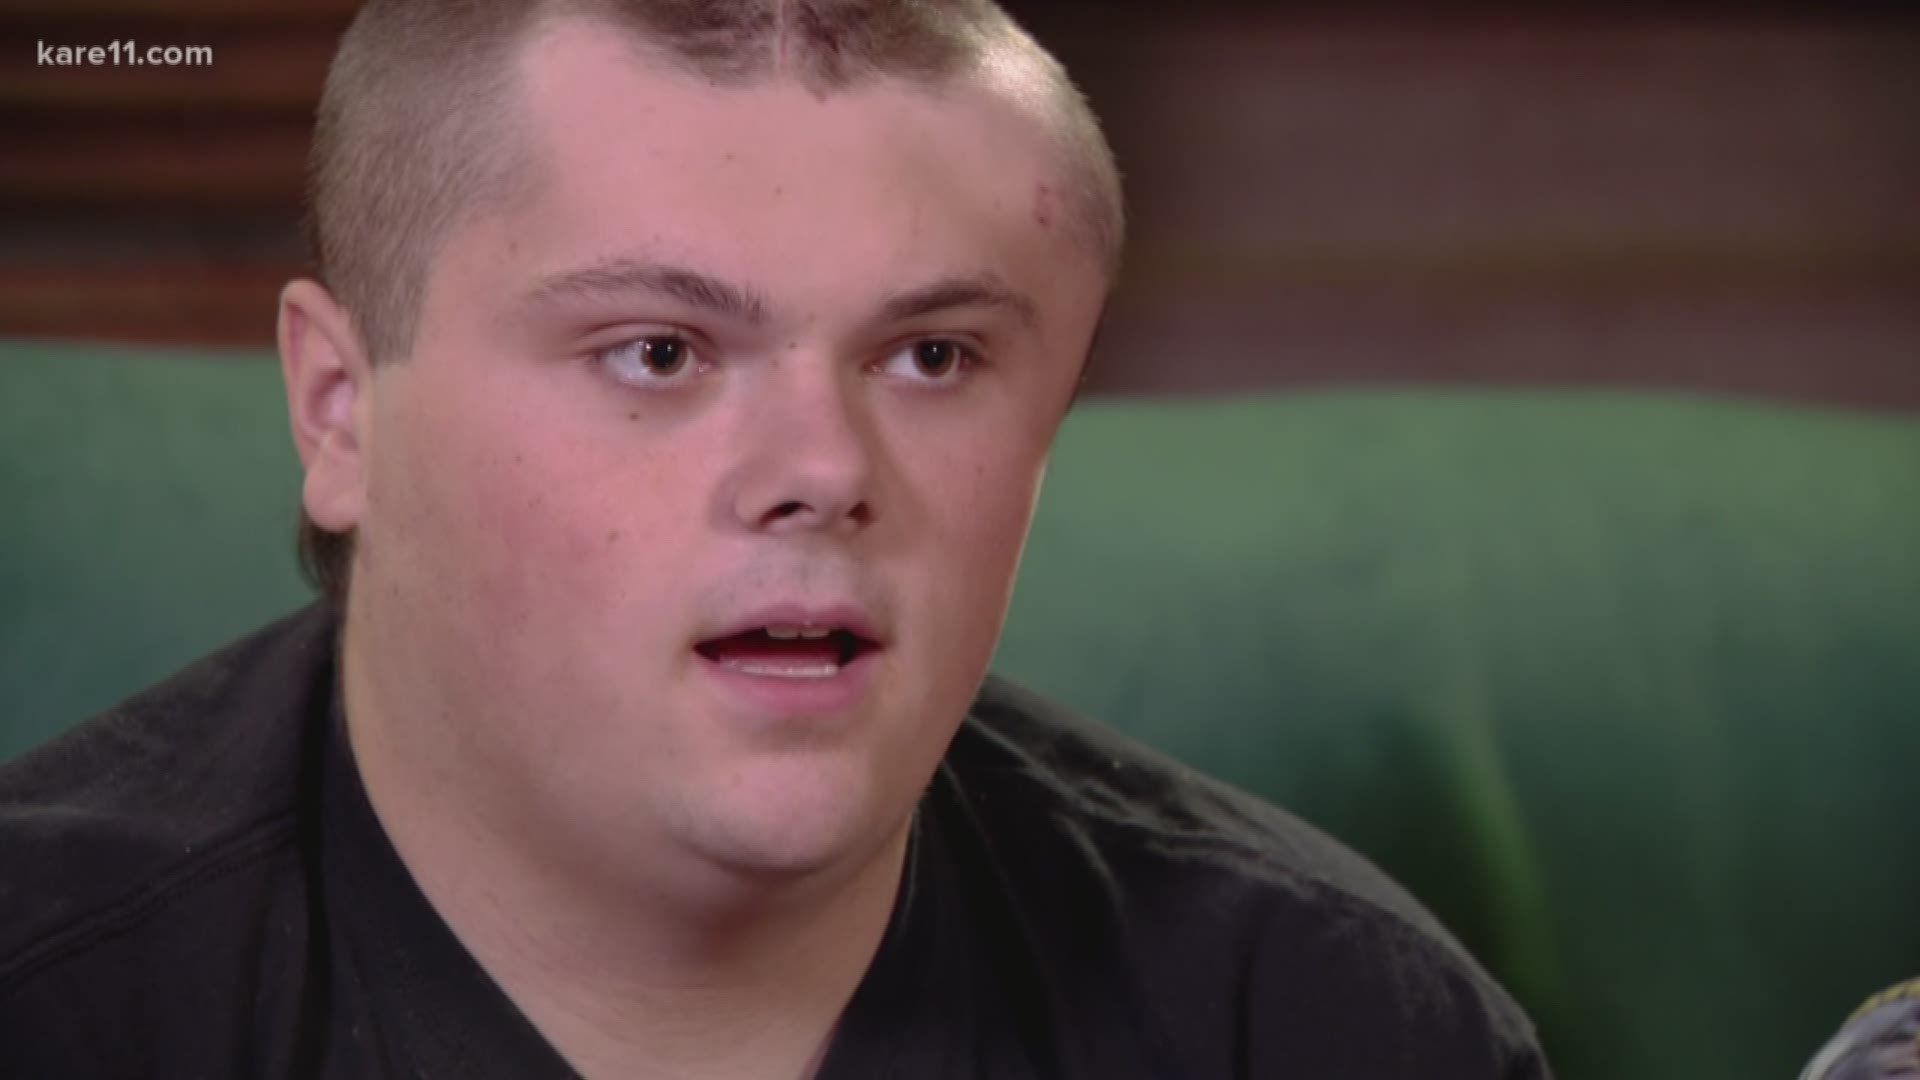 A Hill-Murray football player had what a lot of people are calling a "miraculous" recovery from a brain hemorrhage. KARE 11's Randy Shaver sat down with Zach Zarembinski and his family to discuss the frightening injury.